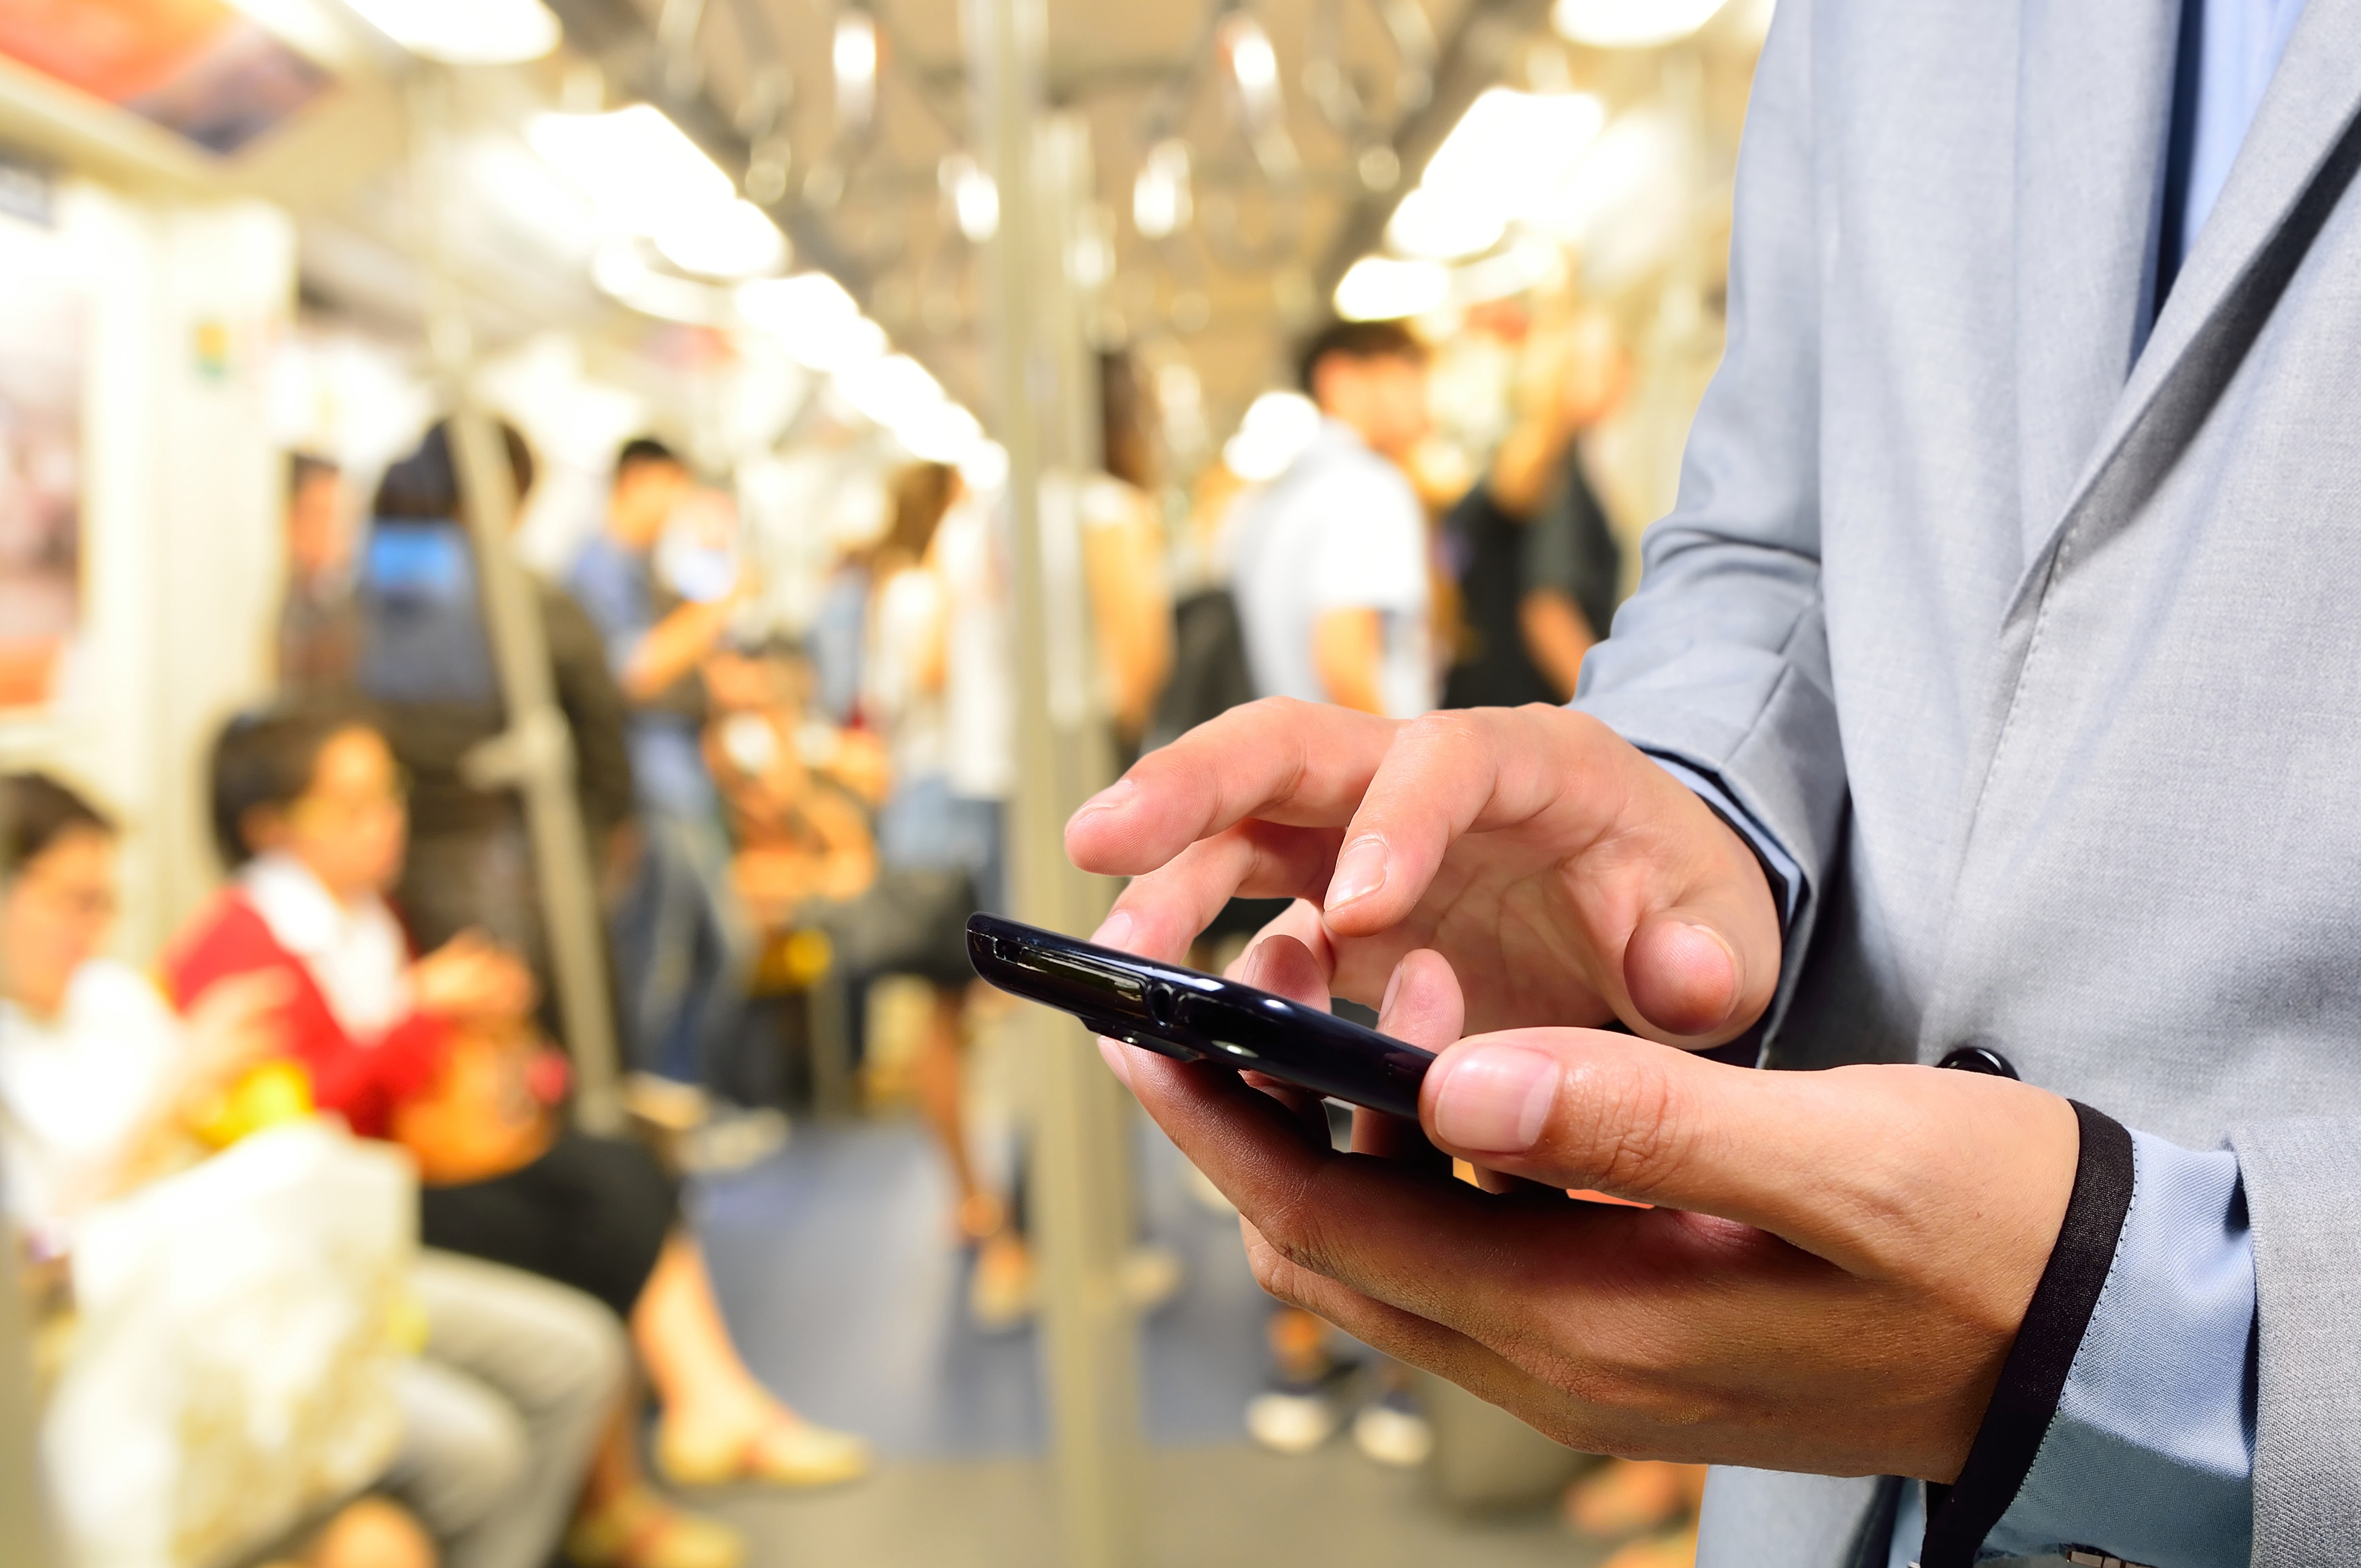 Cities across China are listening to the complaints of commuters and ordering owners of noisy mobile phones and music devices to turn them down and wear earphones. Photo: Shutterstock